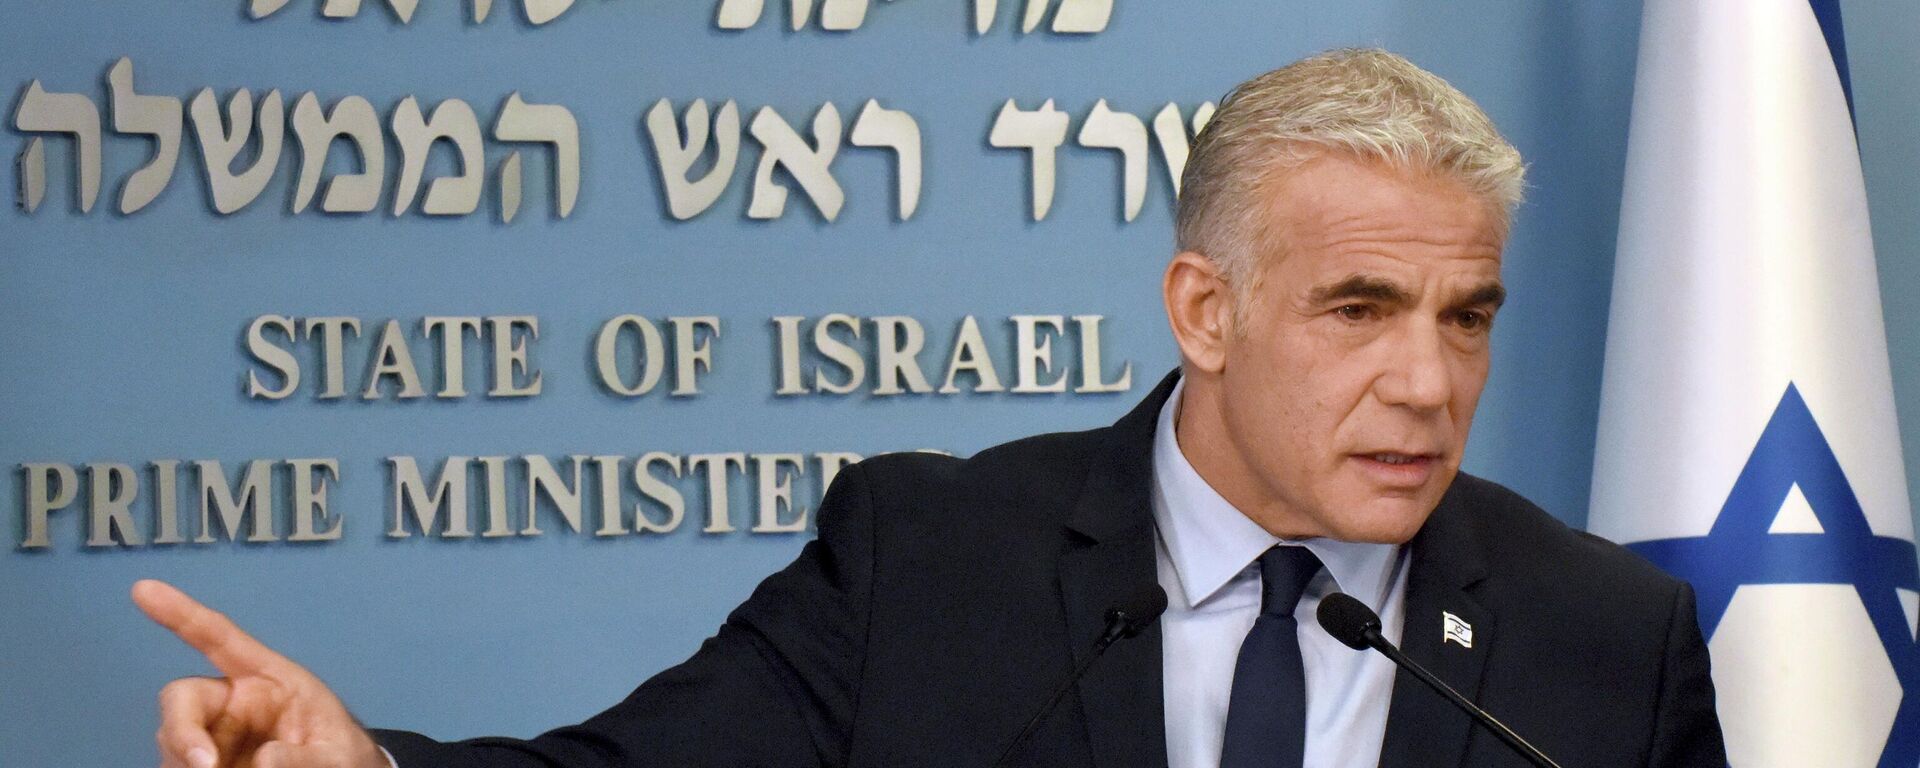 Israeli Prime Minister Yair Lapid speaks about Iran at a security briefing for the foreign press at the Prime Minister's office in Jerusalem, Wednesday, Aug. 24, 2022. Lapid called on U.S. President Joe Biden and Western powers to call off an emerging nuclear deal with Iran, saying an agreement would fail to prevent Iran from developing a nuclear bomb and reward it with billions of dollars to fund Israel's enemies. Israel's caretaker prime minister used stark language on Wednesday in his criticism of the expected agreement. (Debbie Hill/Pool via AP) - Sputnik International, 1920, 18.07.2023